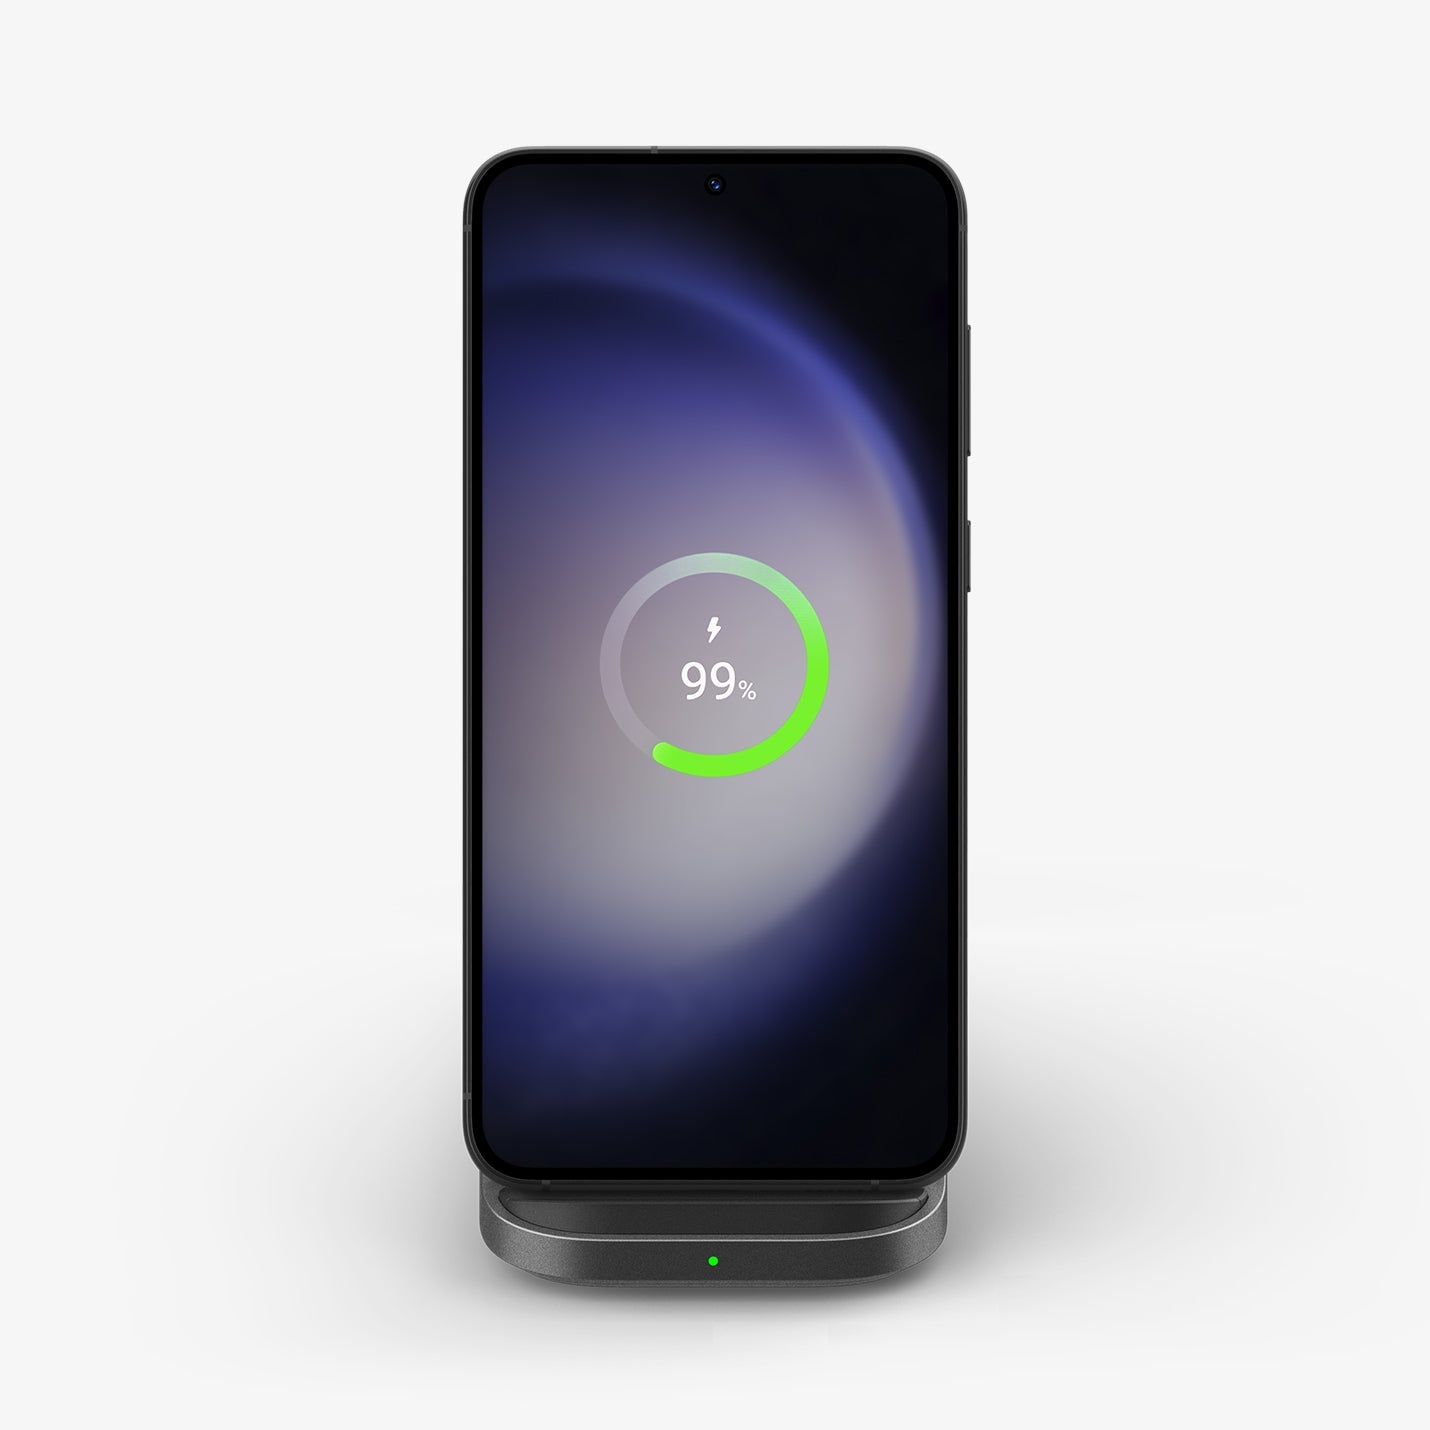 ACH04622 - ArcField™ Flex Wireless Charger PF2201 in black showing the front with phone charging